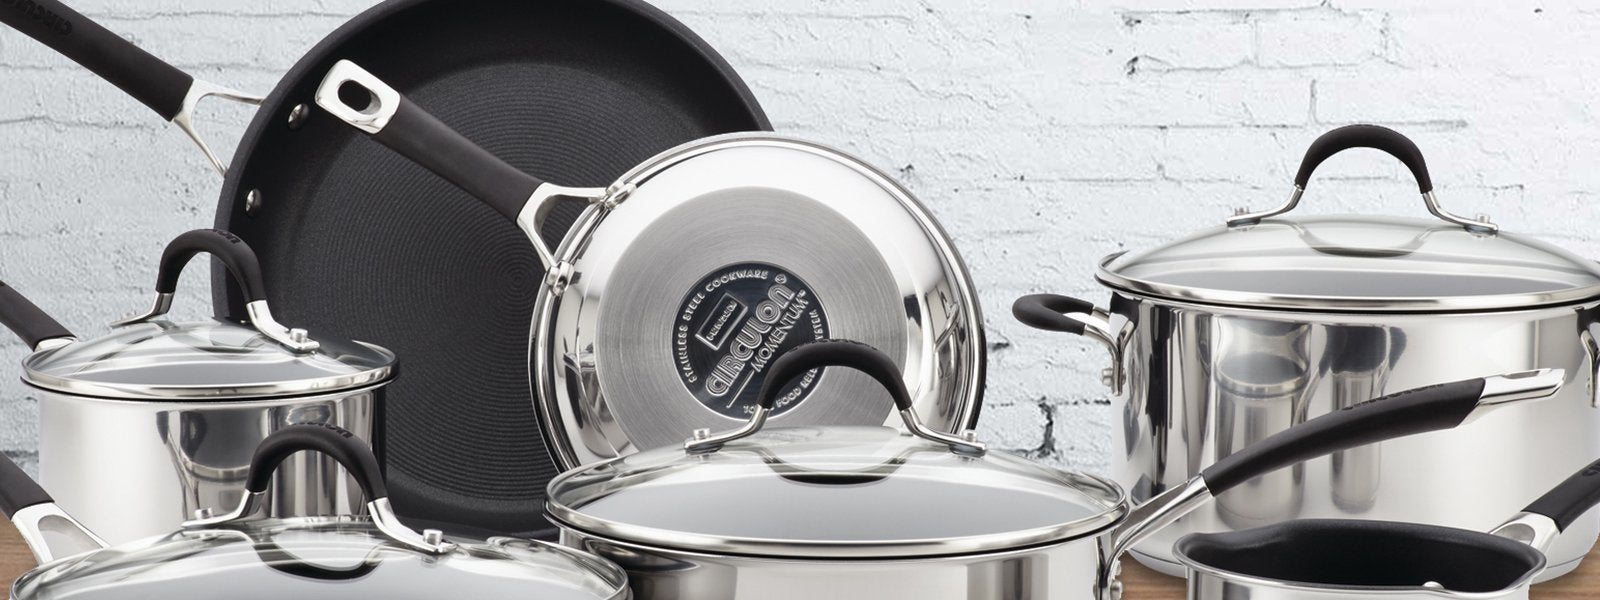 Stainless Steel Cookware- "Companion For Lifetime"